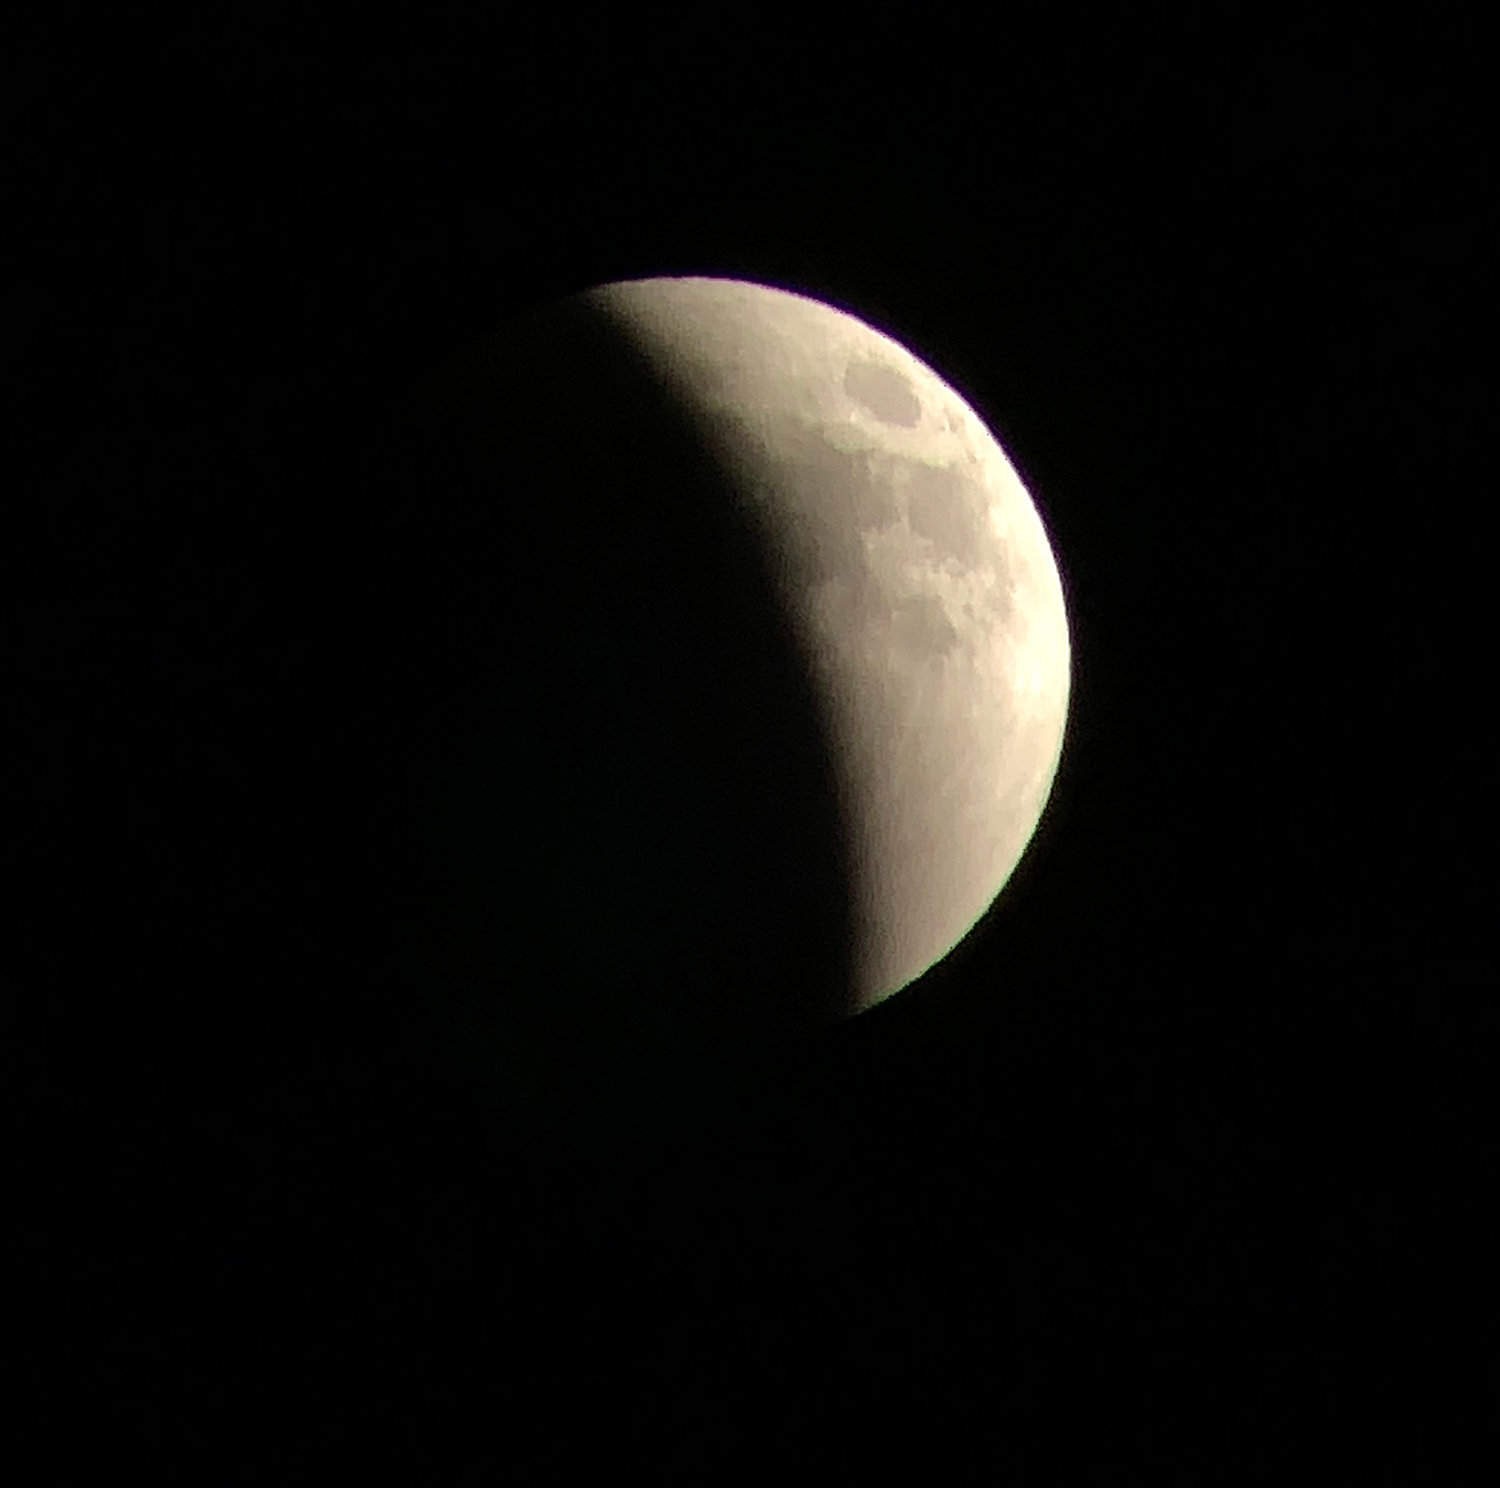 This is a photo taken by Amanda Crandall during the lunar eclipse on May 15.